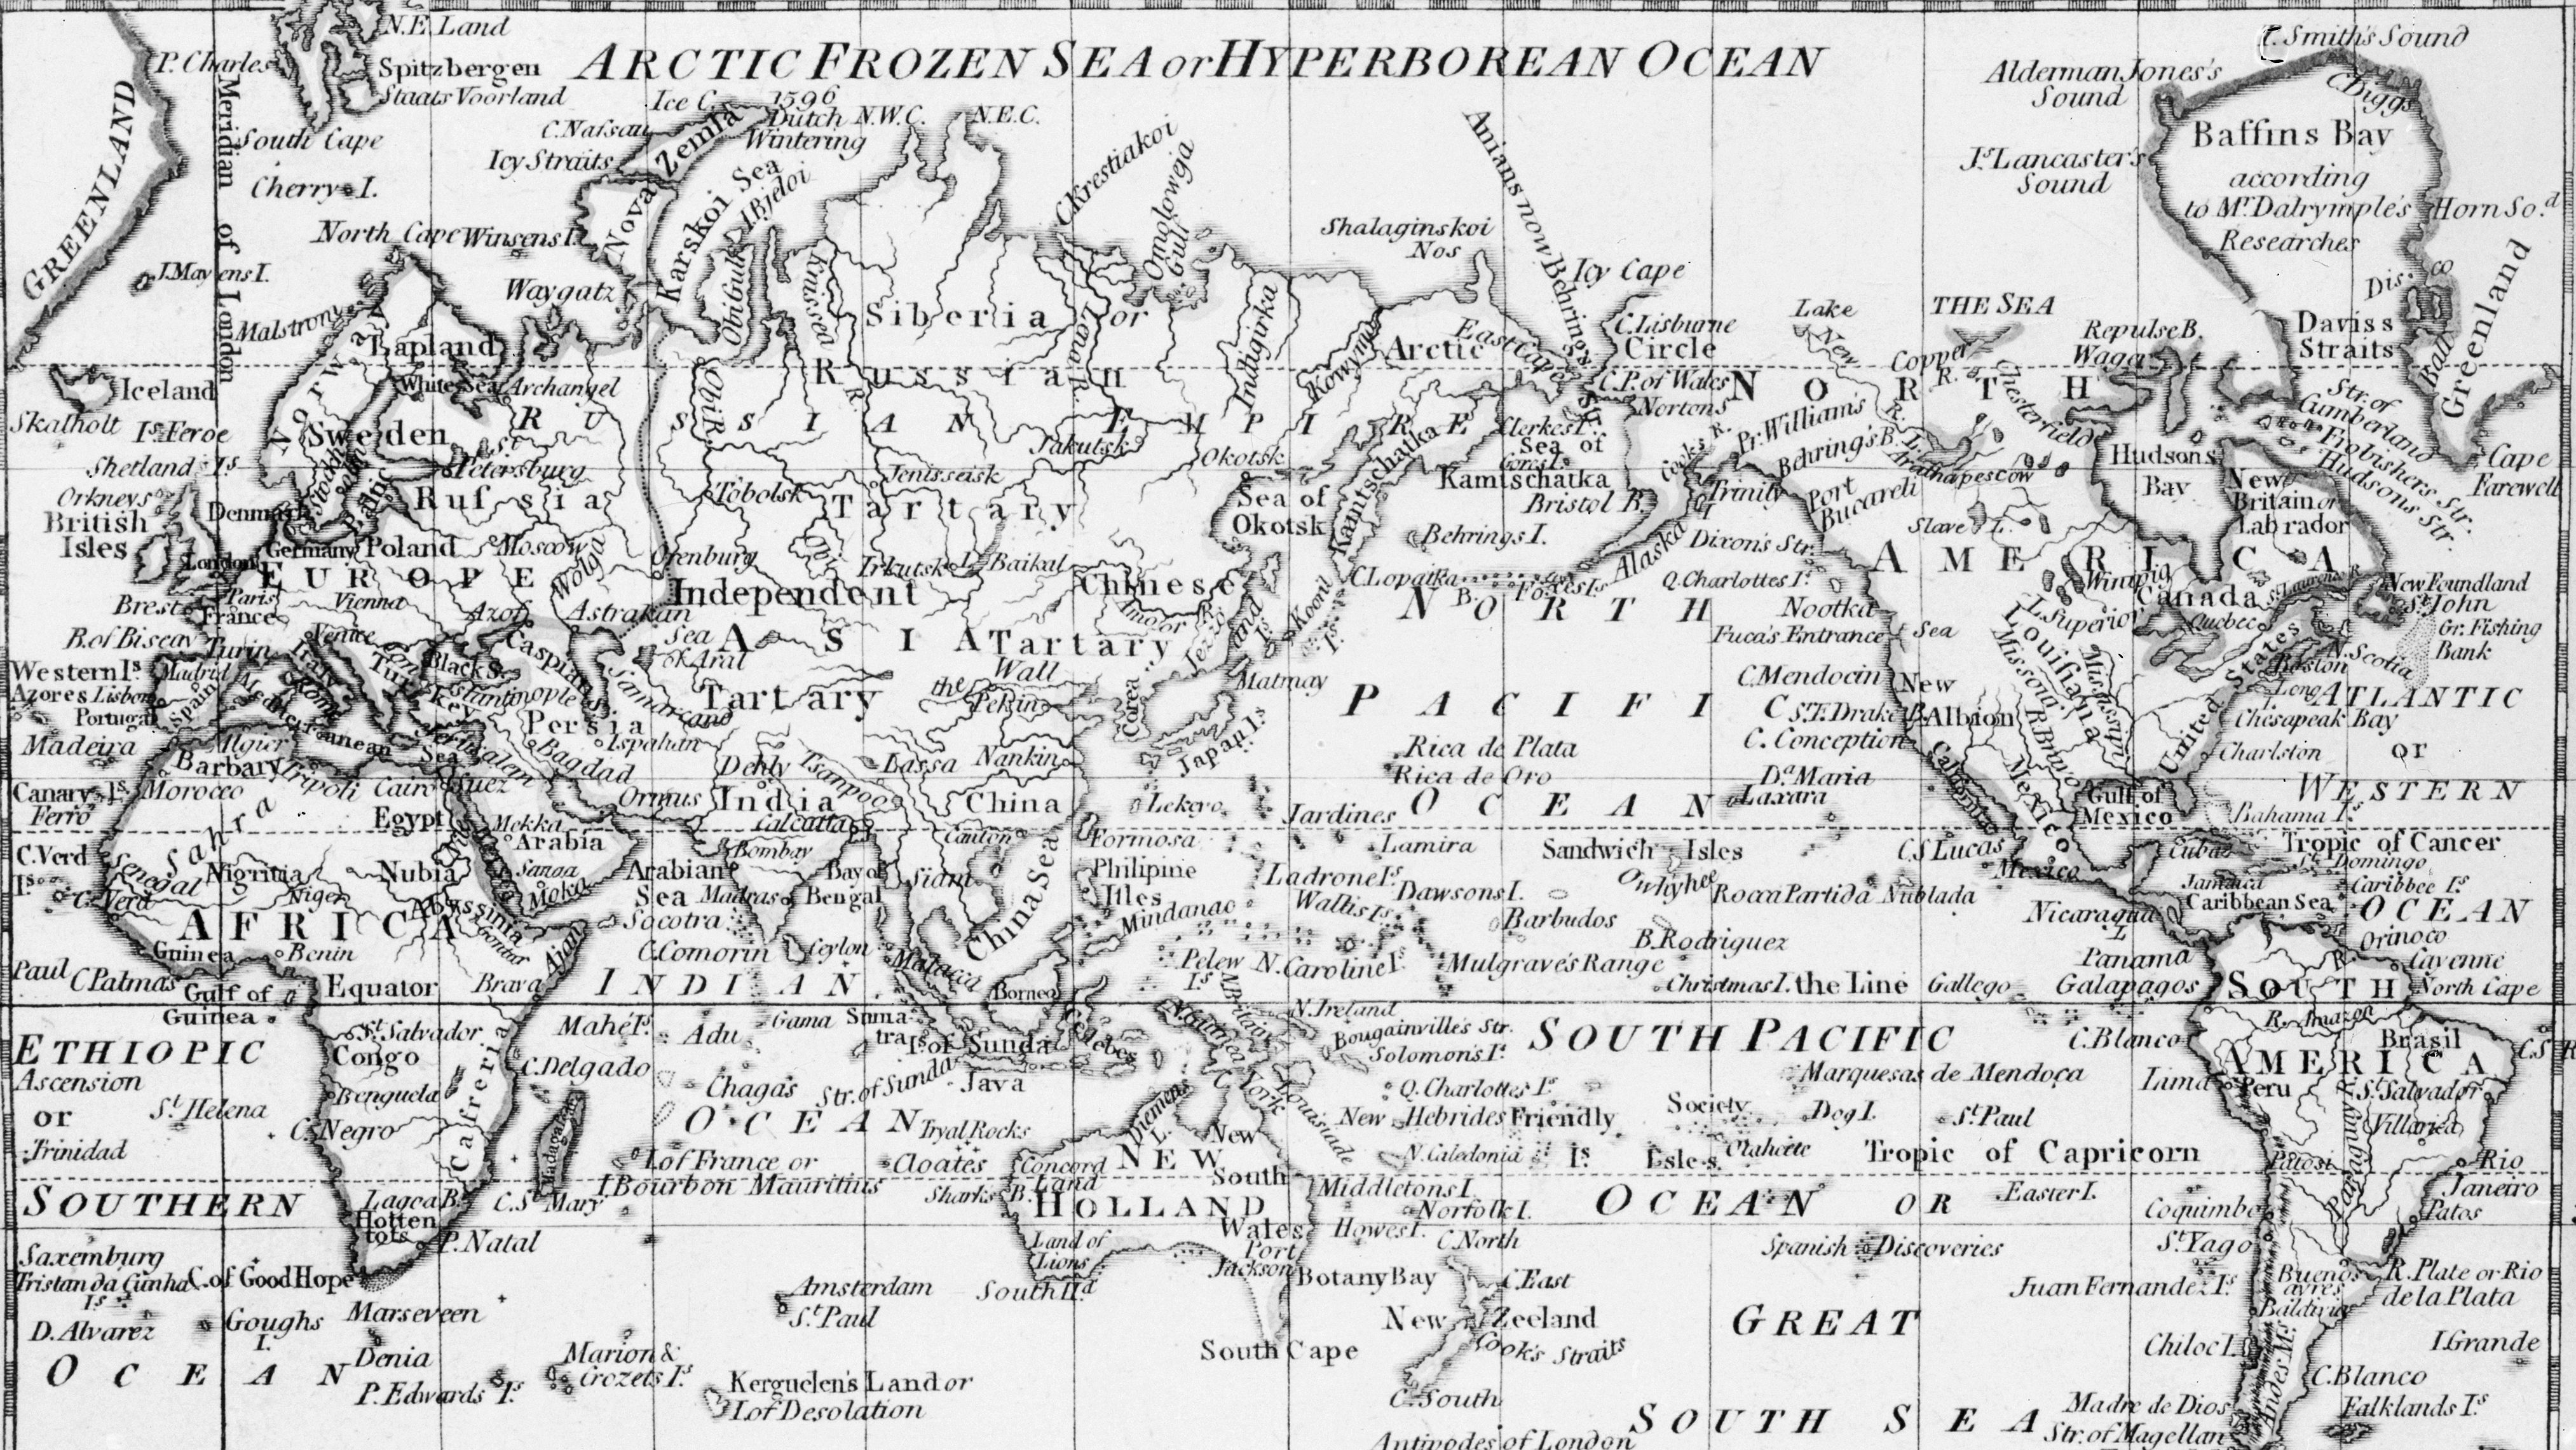 Chart of the world as per Mercator's projection, circa 1798, with the most recent discoveries. 